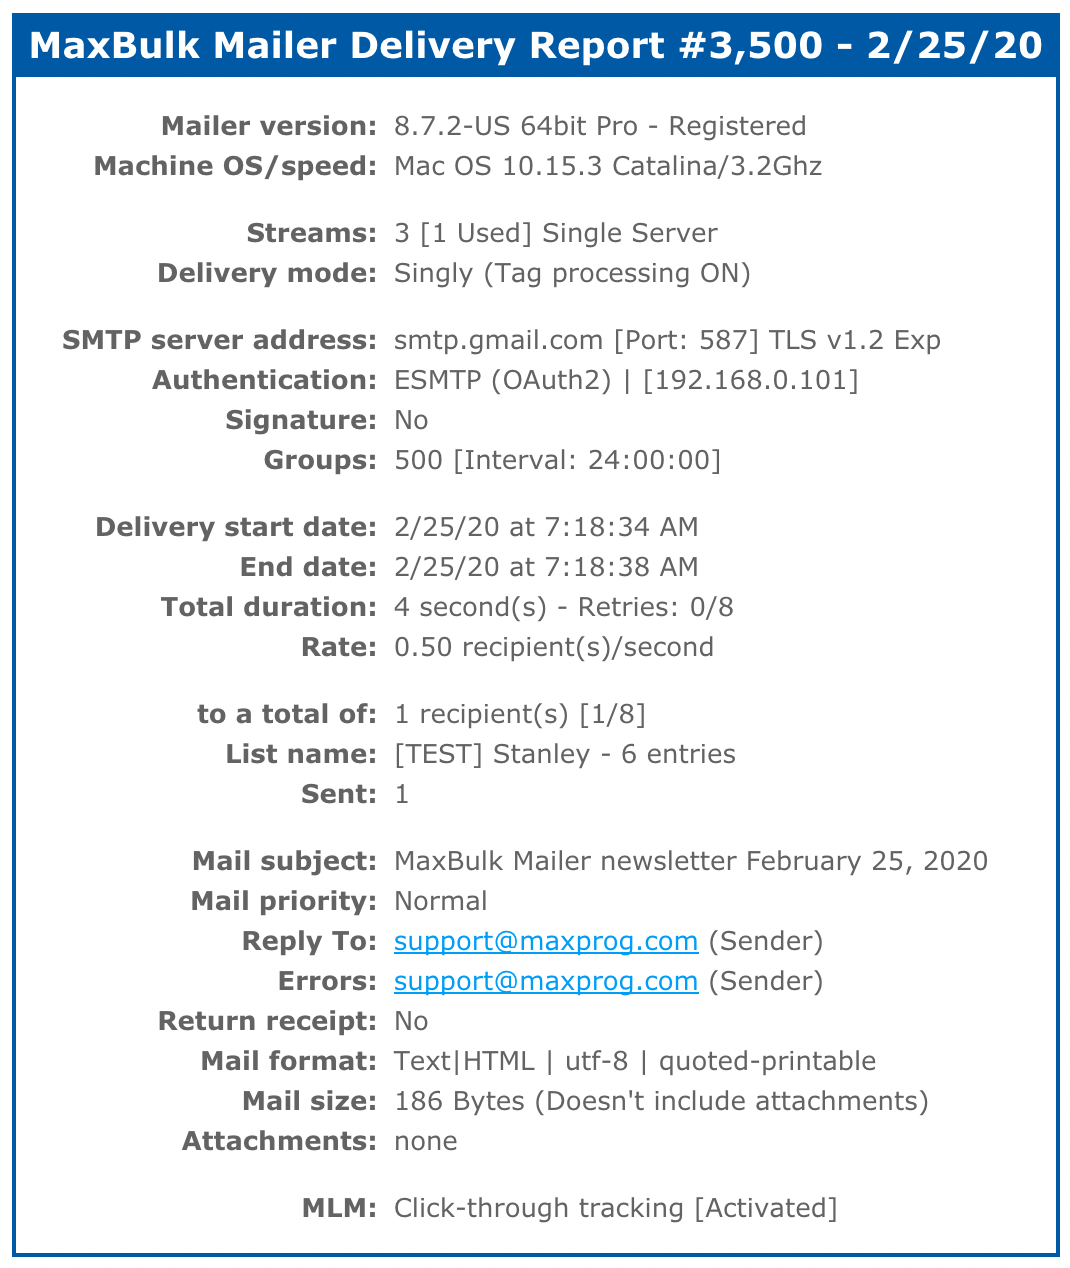 maxbulk mailer delivery report hacked